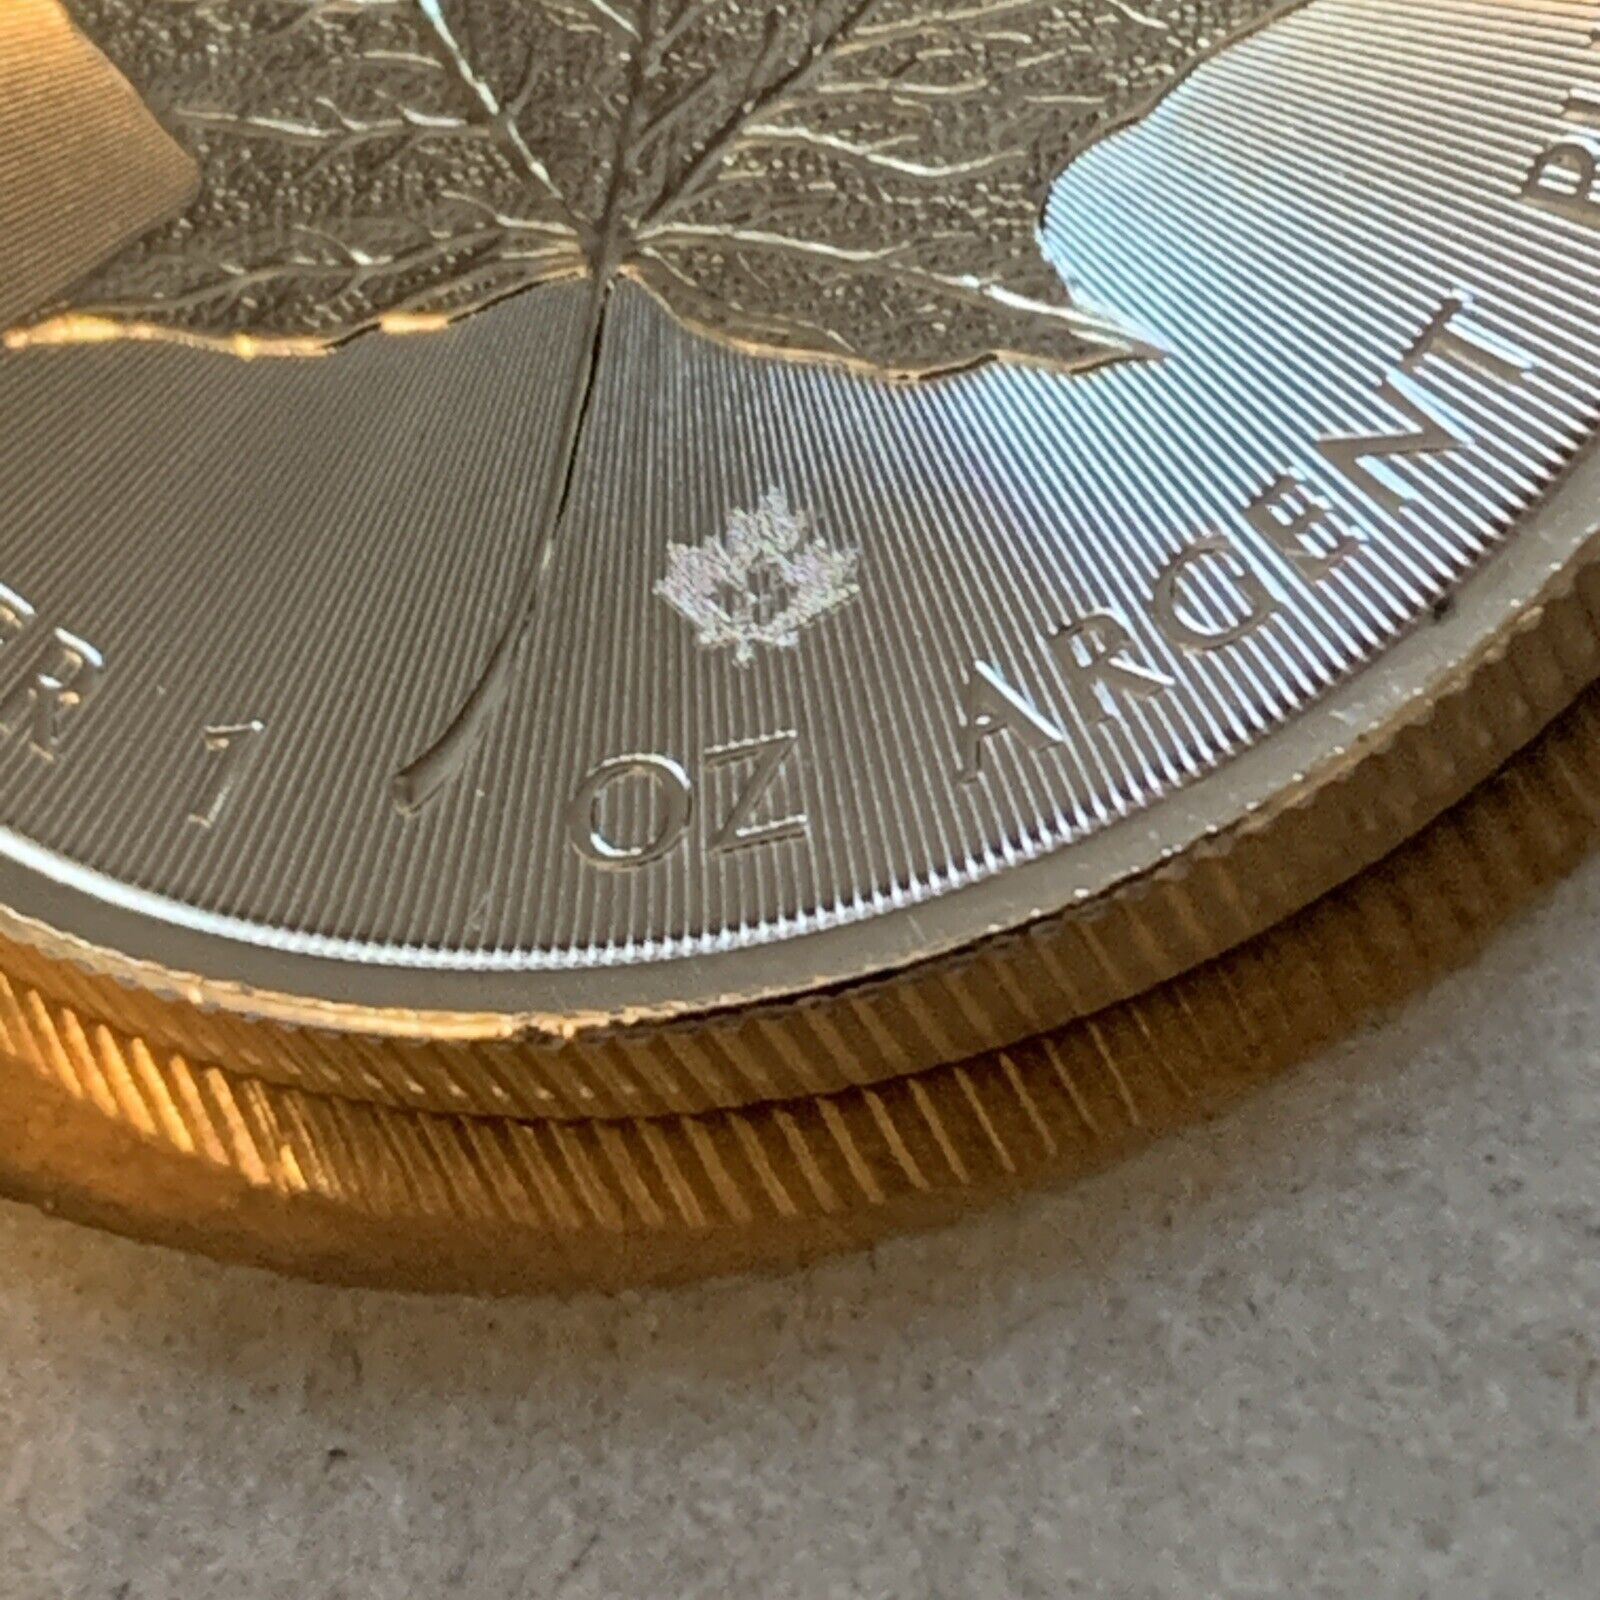 2021 Canadian $5 Silver Maple Leaf .9999 Pure 1 oz SHIPS FREE* SPECIAL SALE $